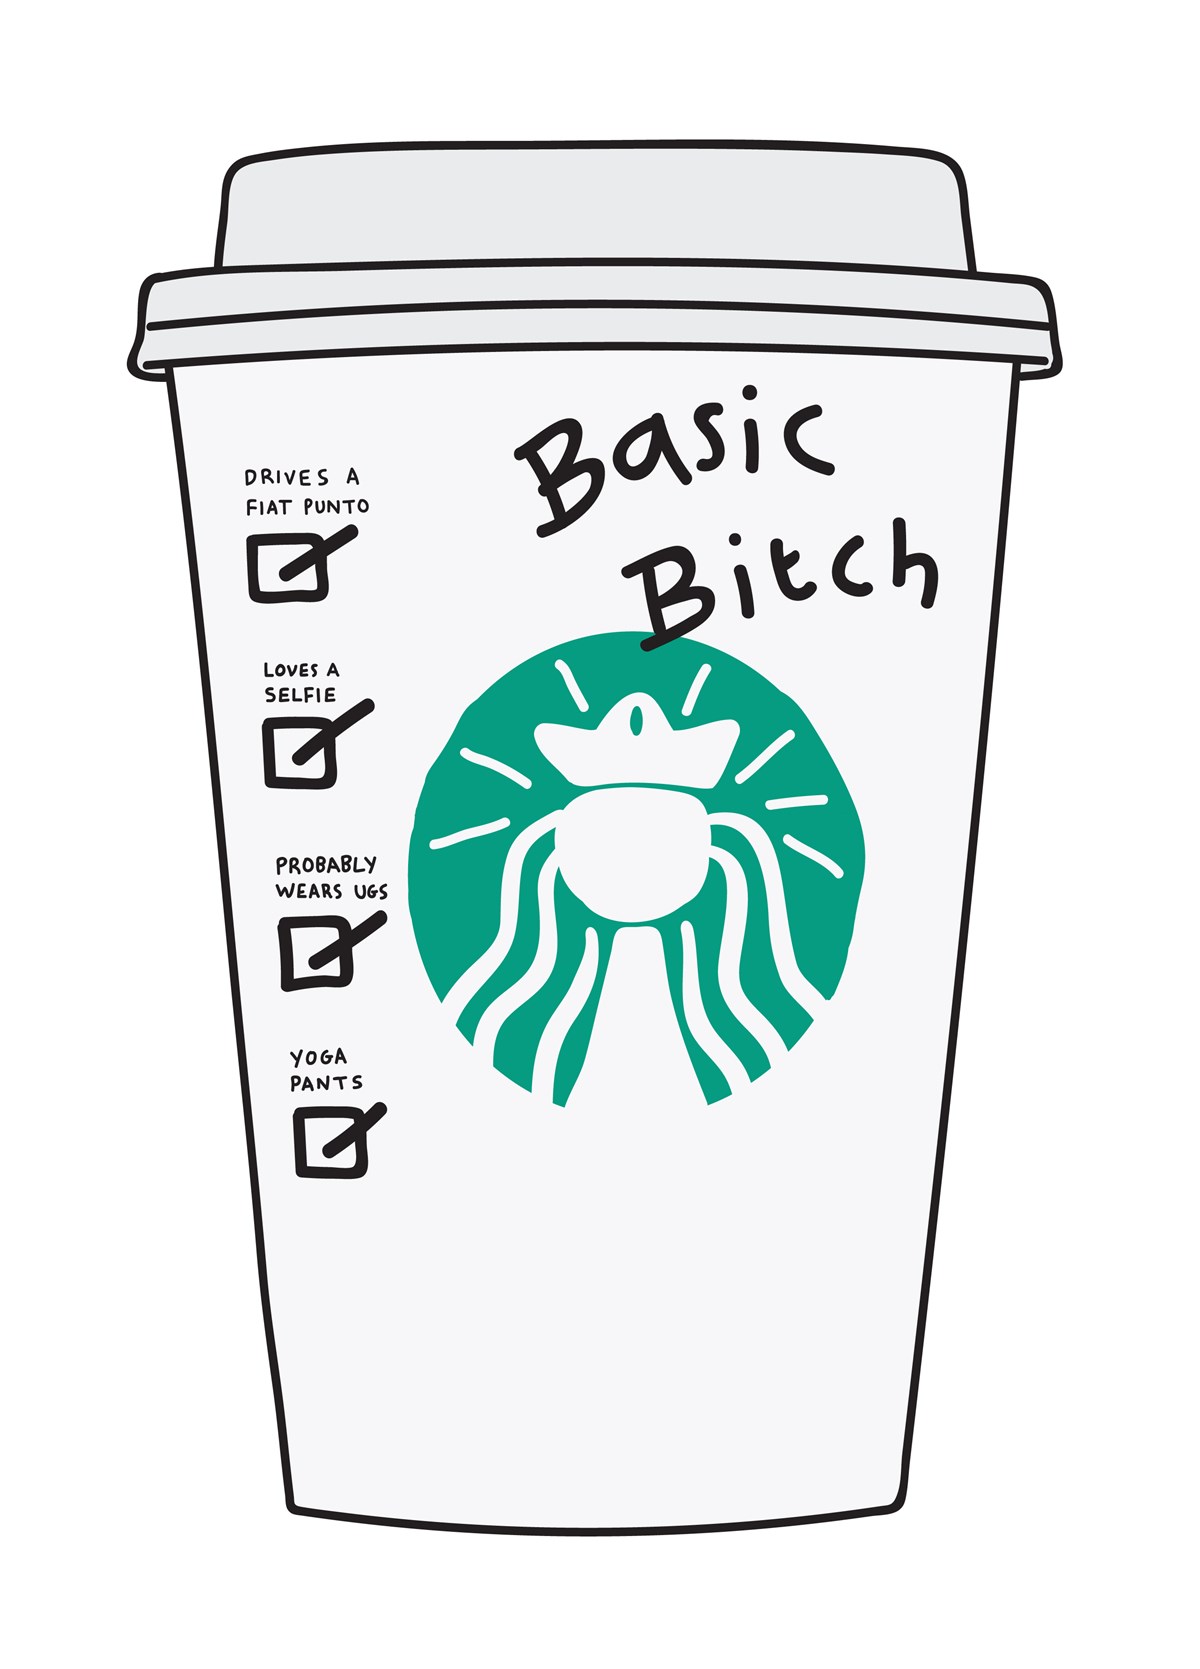 How To Tell If Youre A Basic Bitch